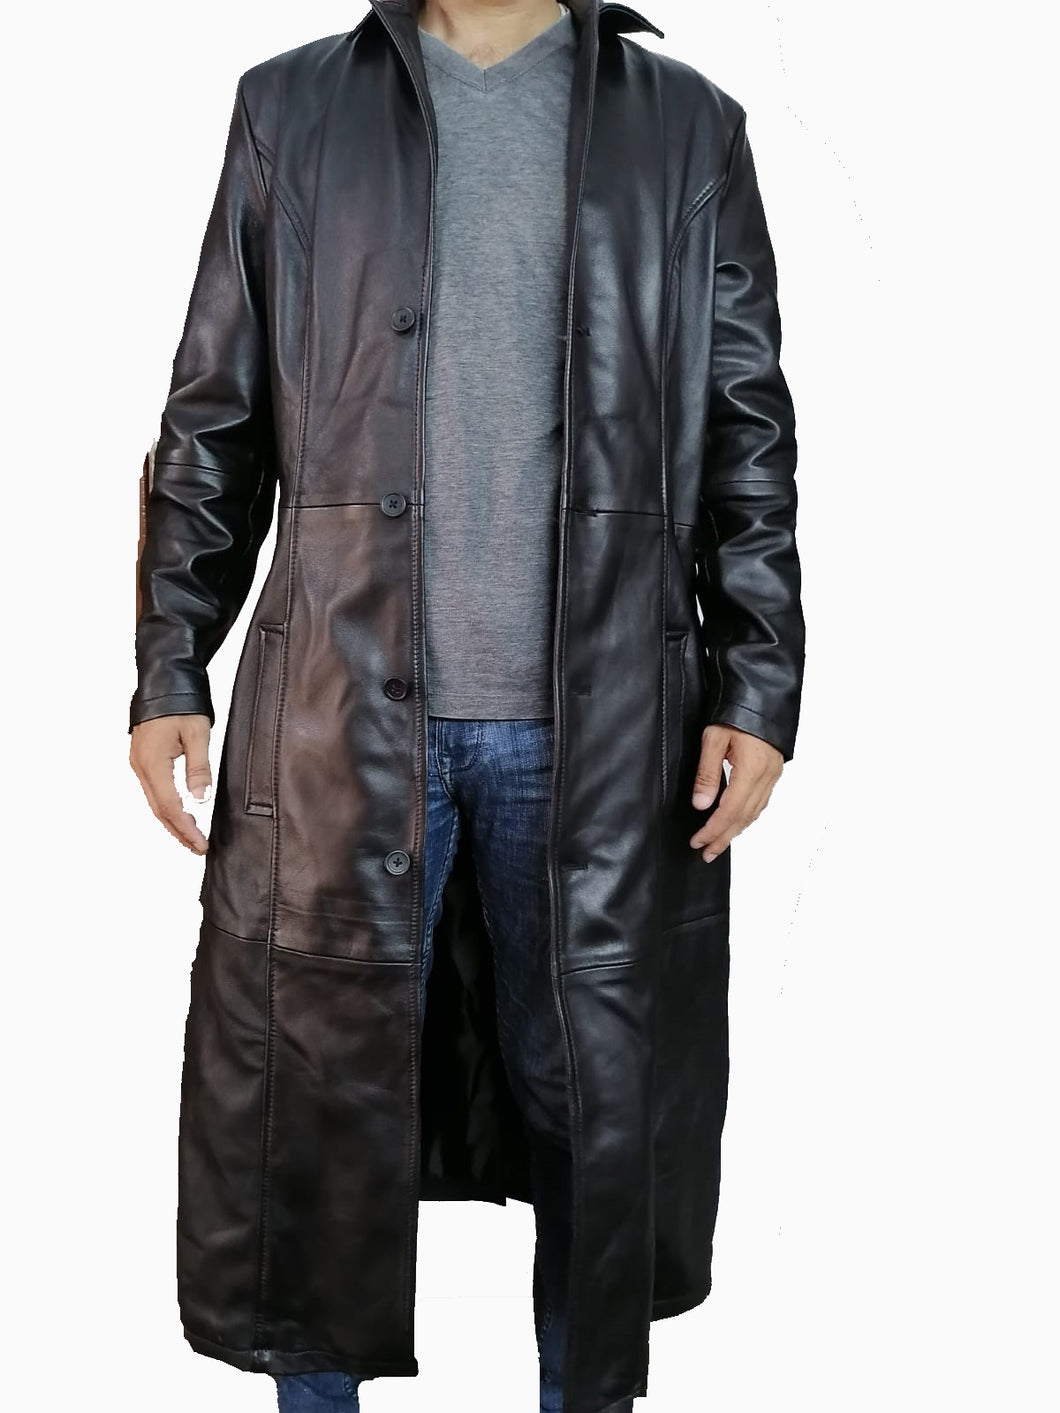 Premium Quality Genuine Sheep Soft Leather Long Coat/Overall  (Free Home Delivery Within 7 To 10 Days Worldwide)